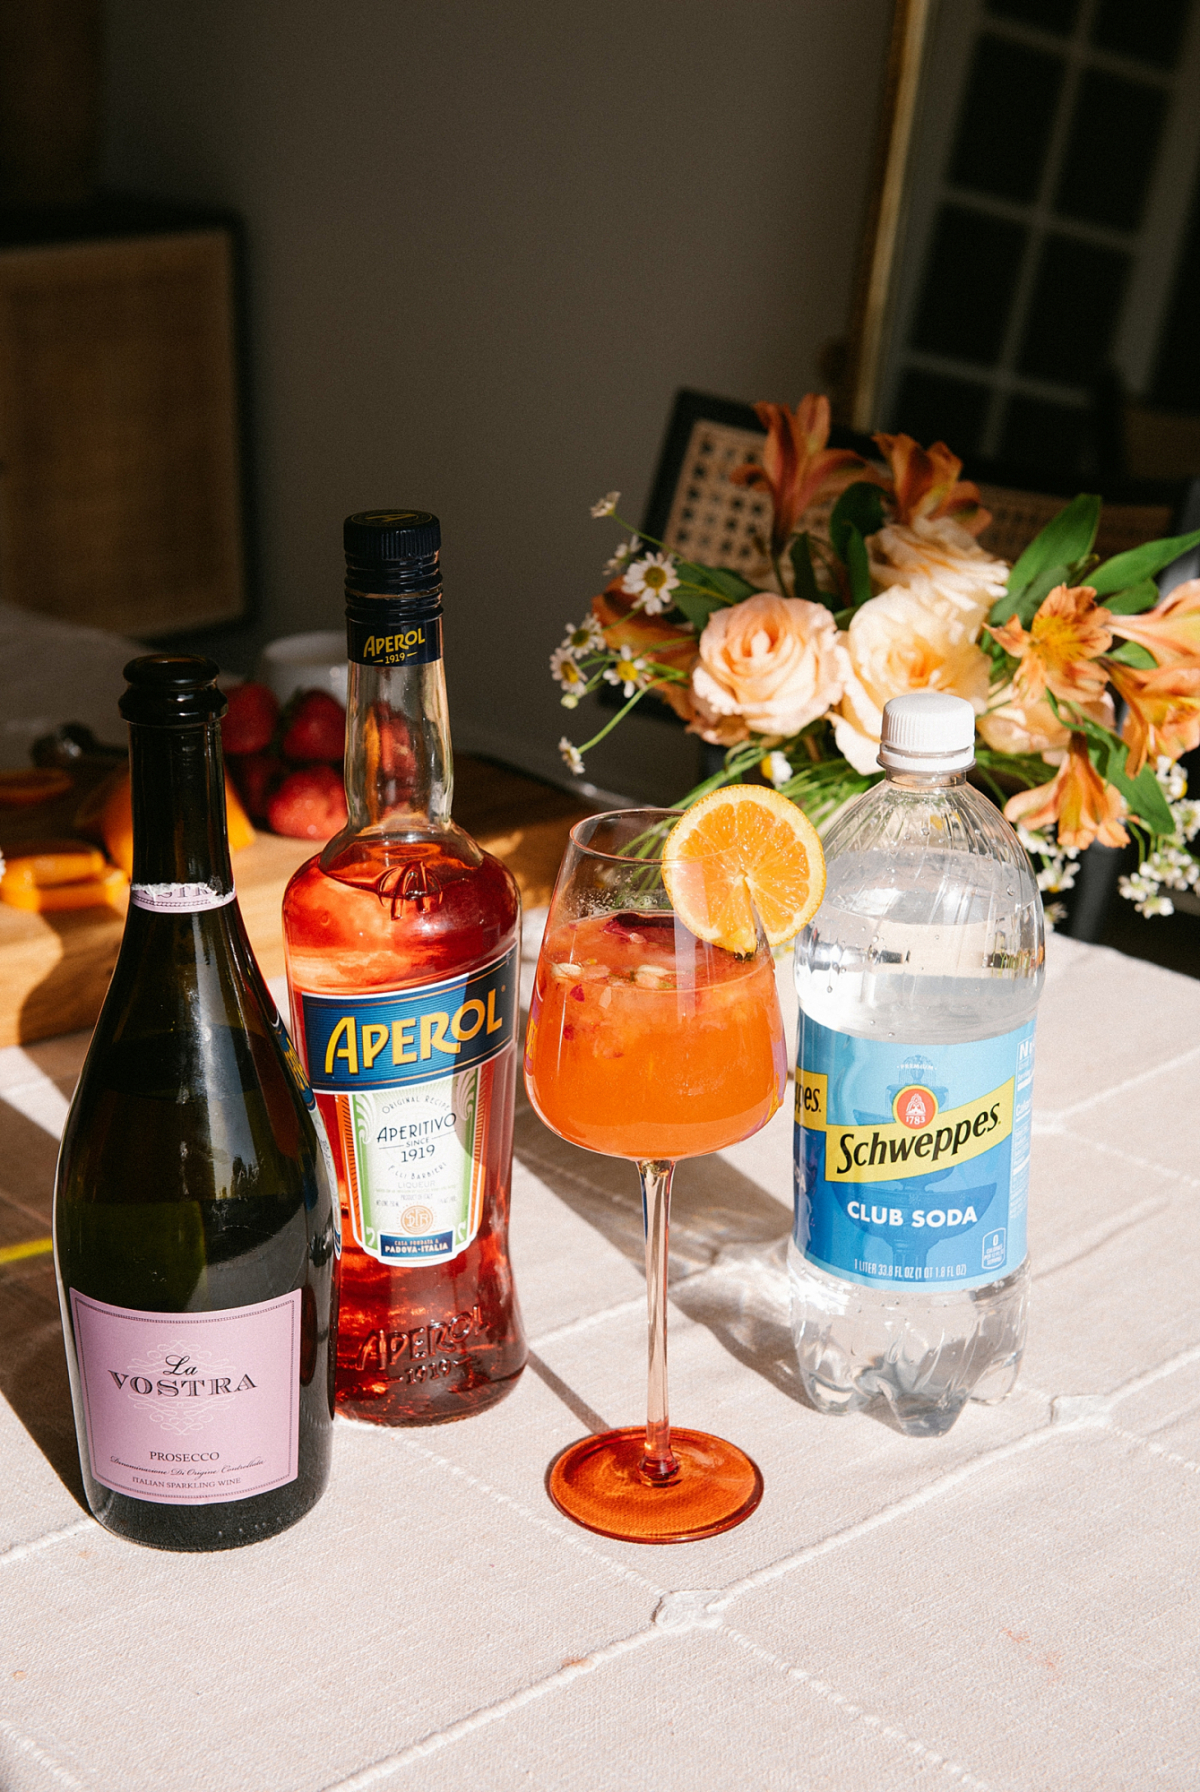 https://mommy-diary.com/wp-content/uploads/2022/04/how-to-make-aperol-spritz-6-1200x1792.jpg